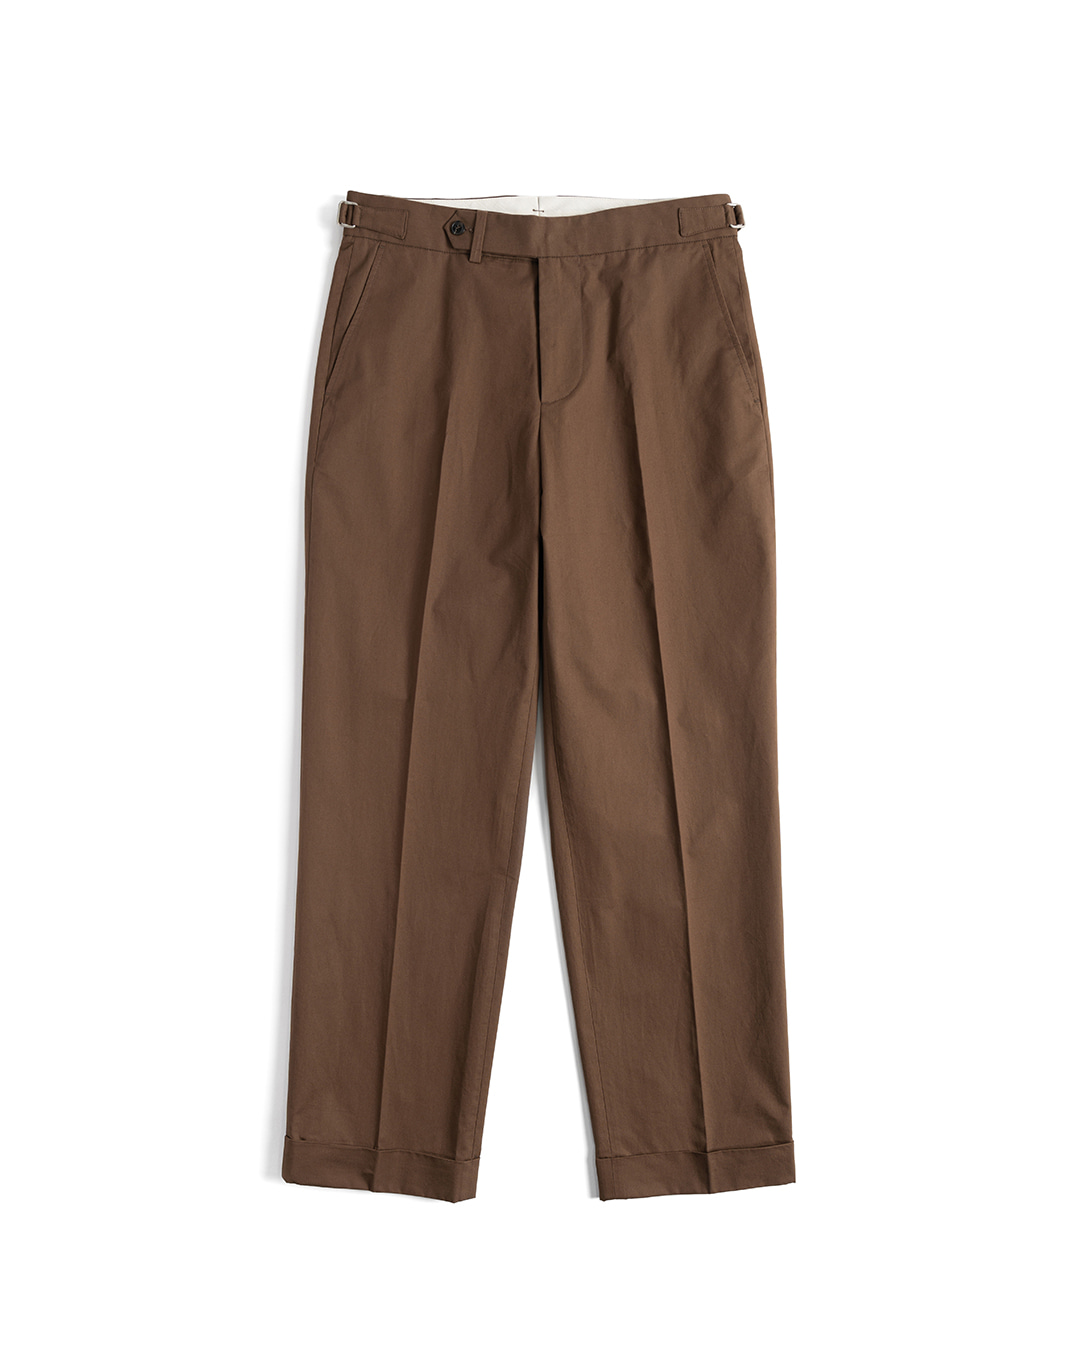 11 COTTON TROUSERS (brown)